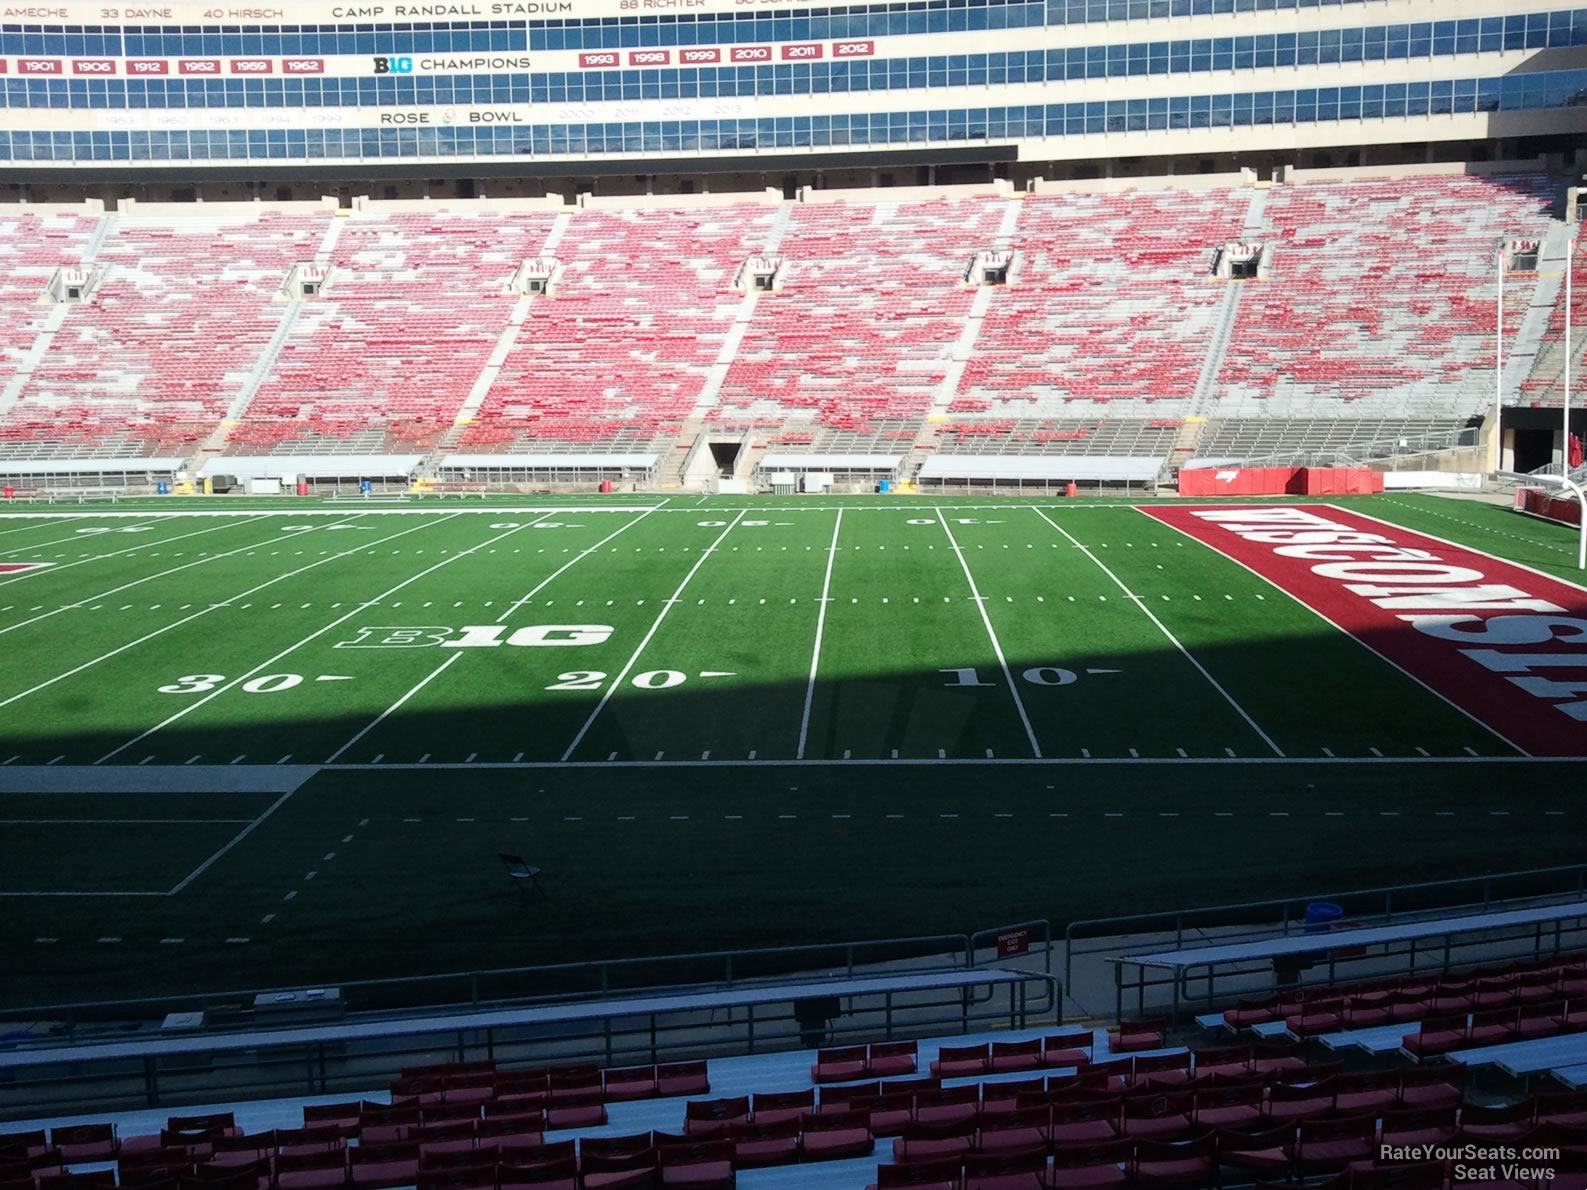 section c, row 30 seat view  - camp randall stadium